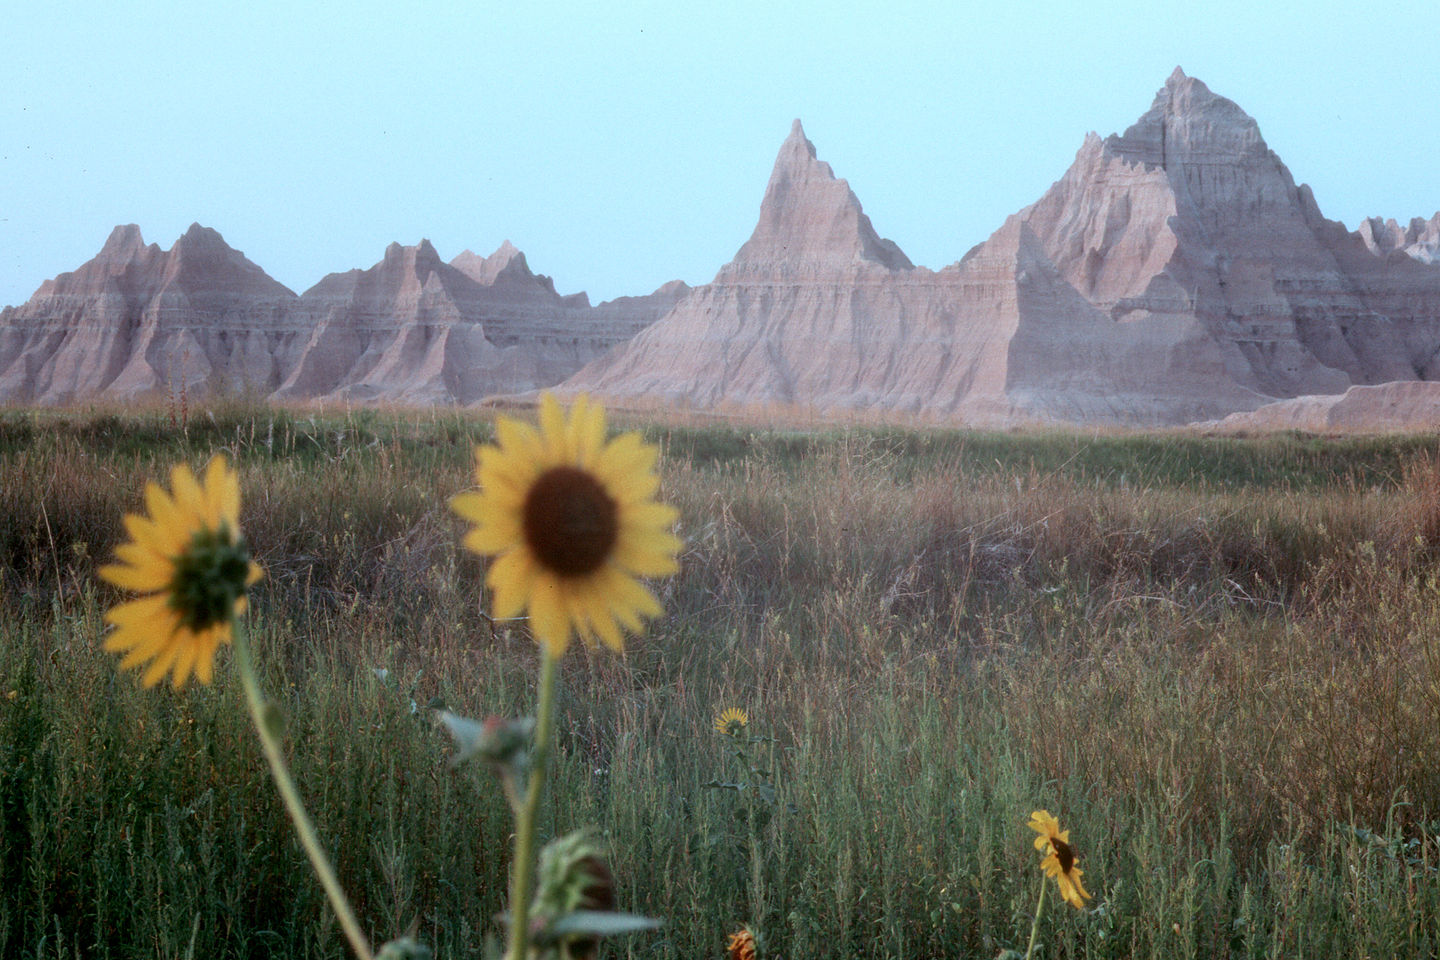 Sunflowers and Badlands